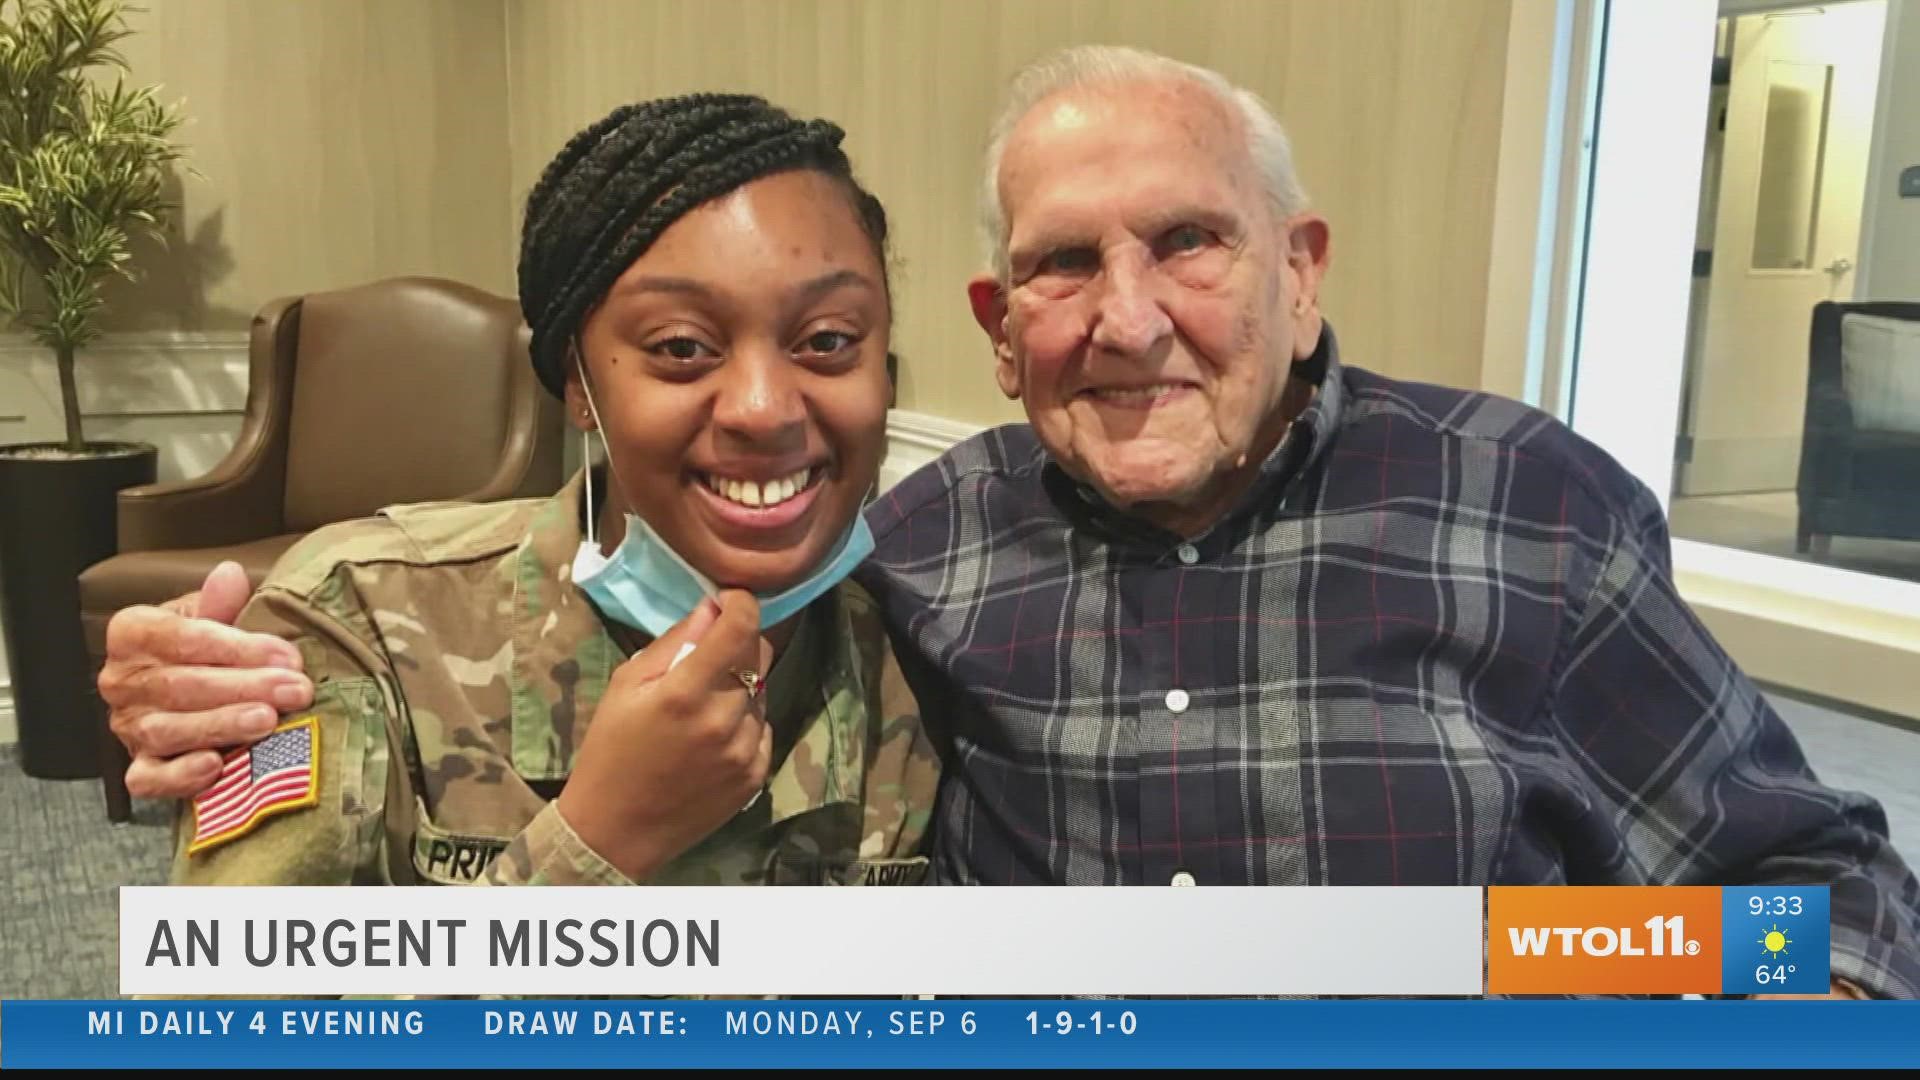 An Ohio WWII veteran took on an urgent mission more than a decade ago - and it just paid off. Grab the tissues for this one!